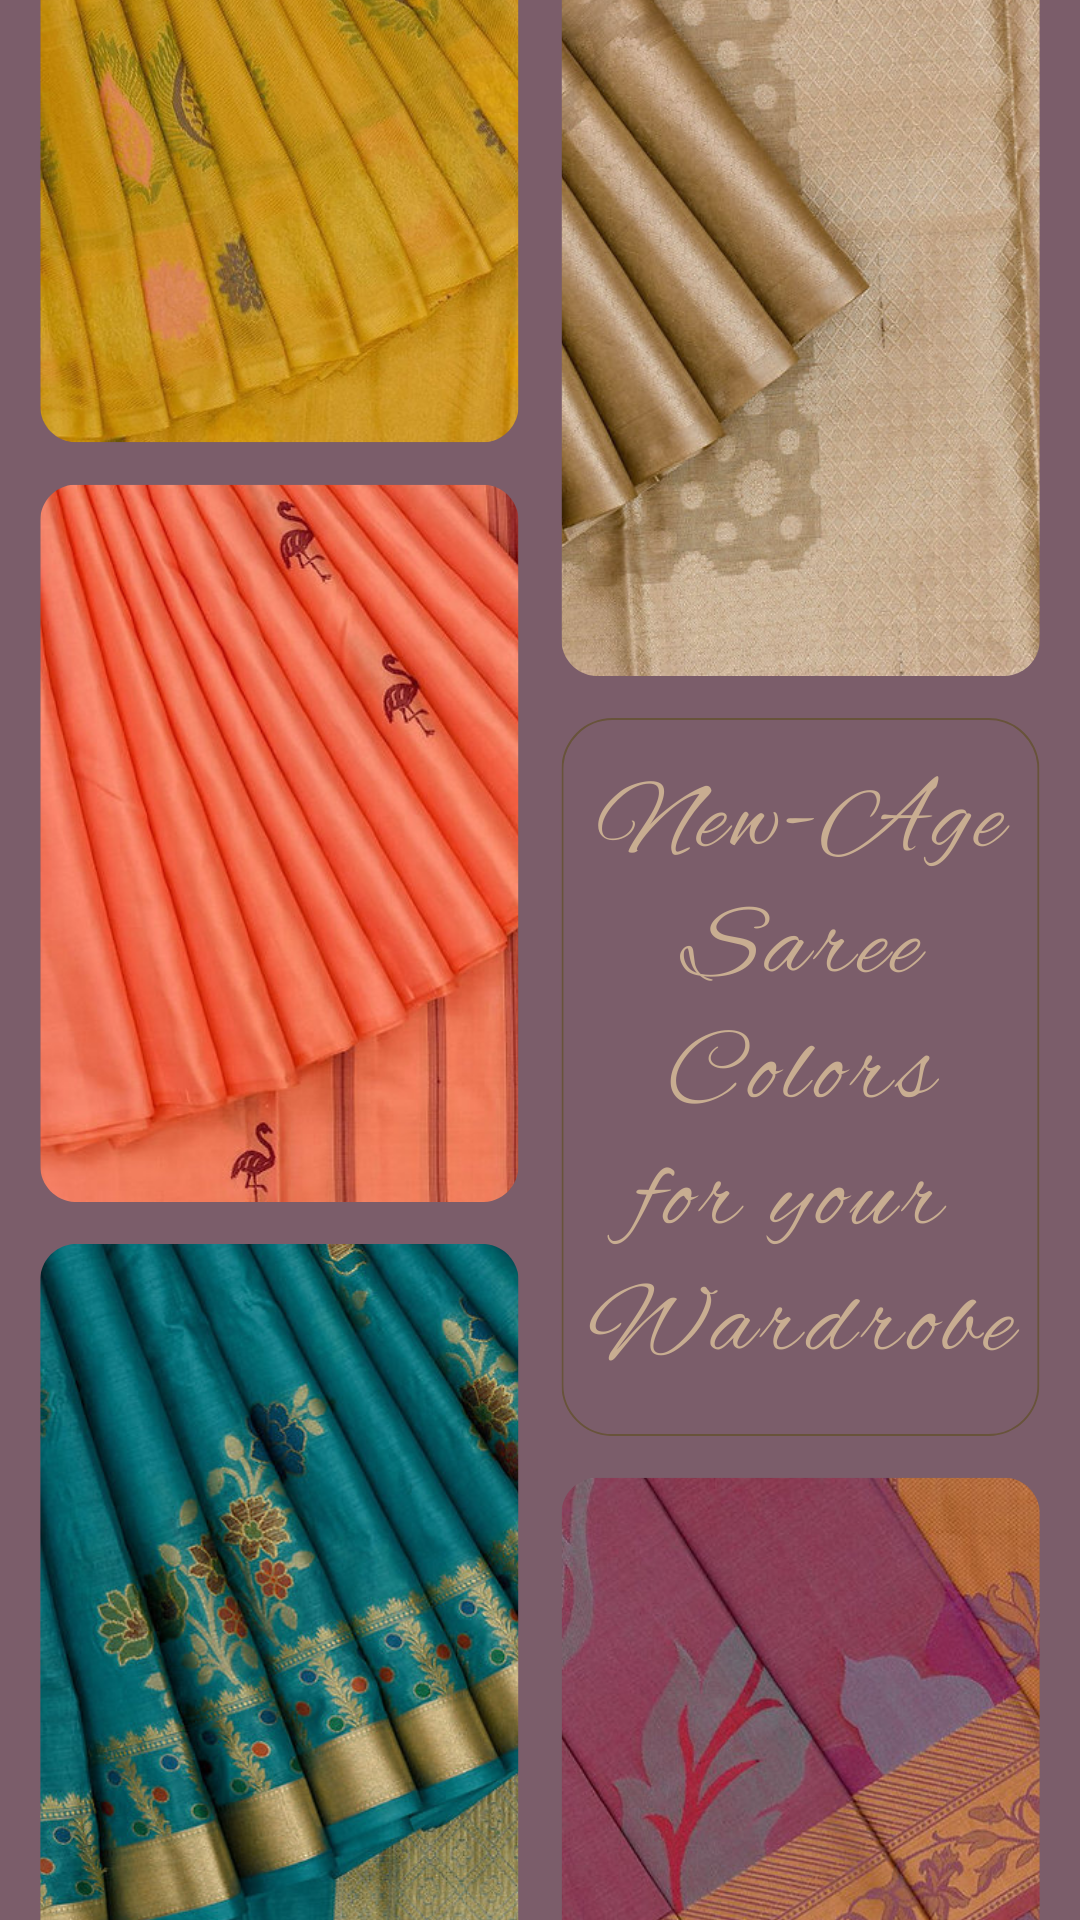 New-age saree colors for your wardrobe !